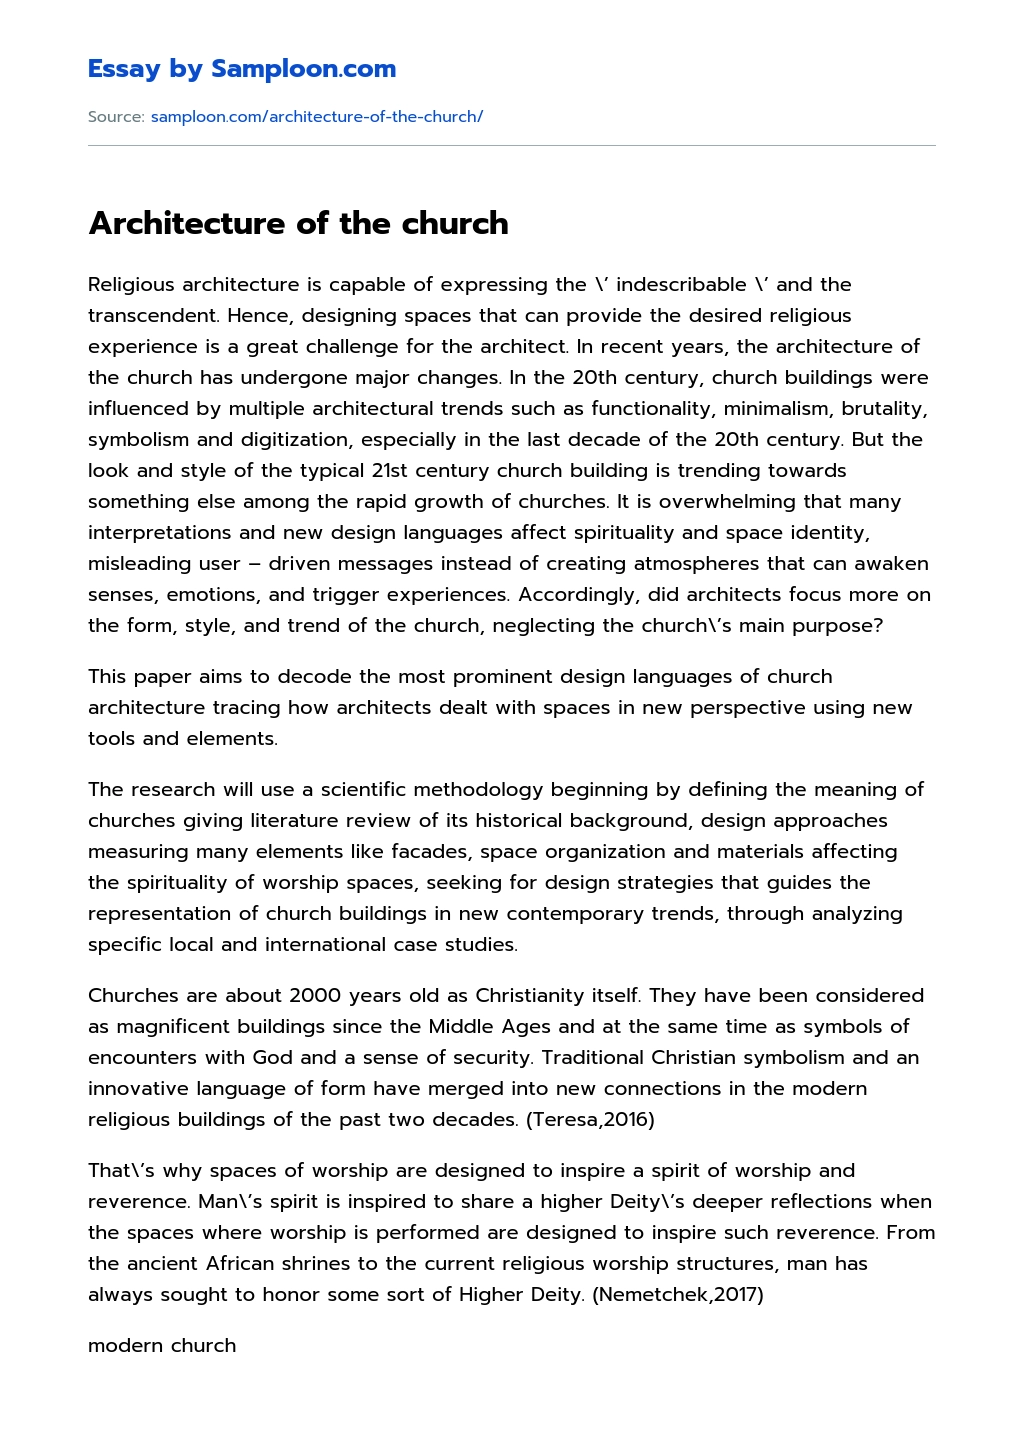 Architecture of the church essay